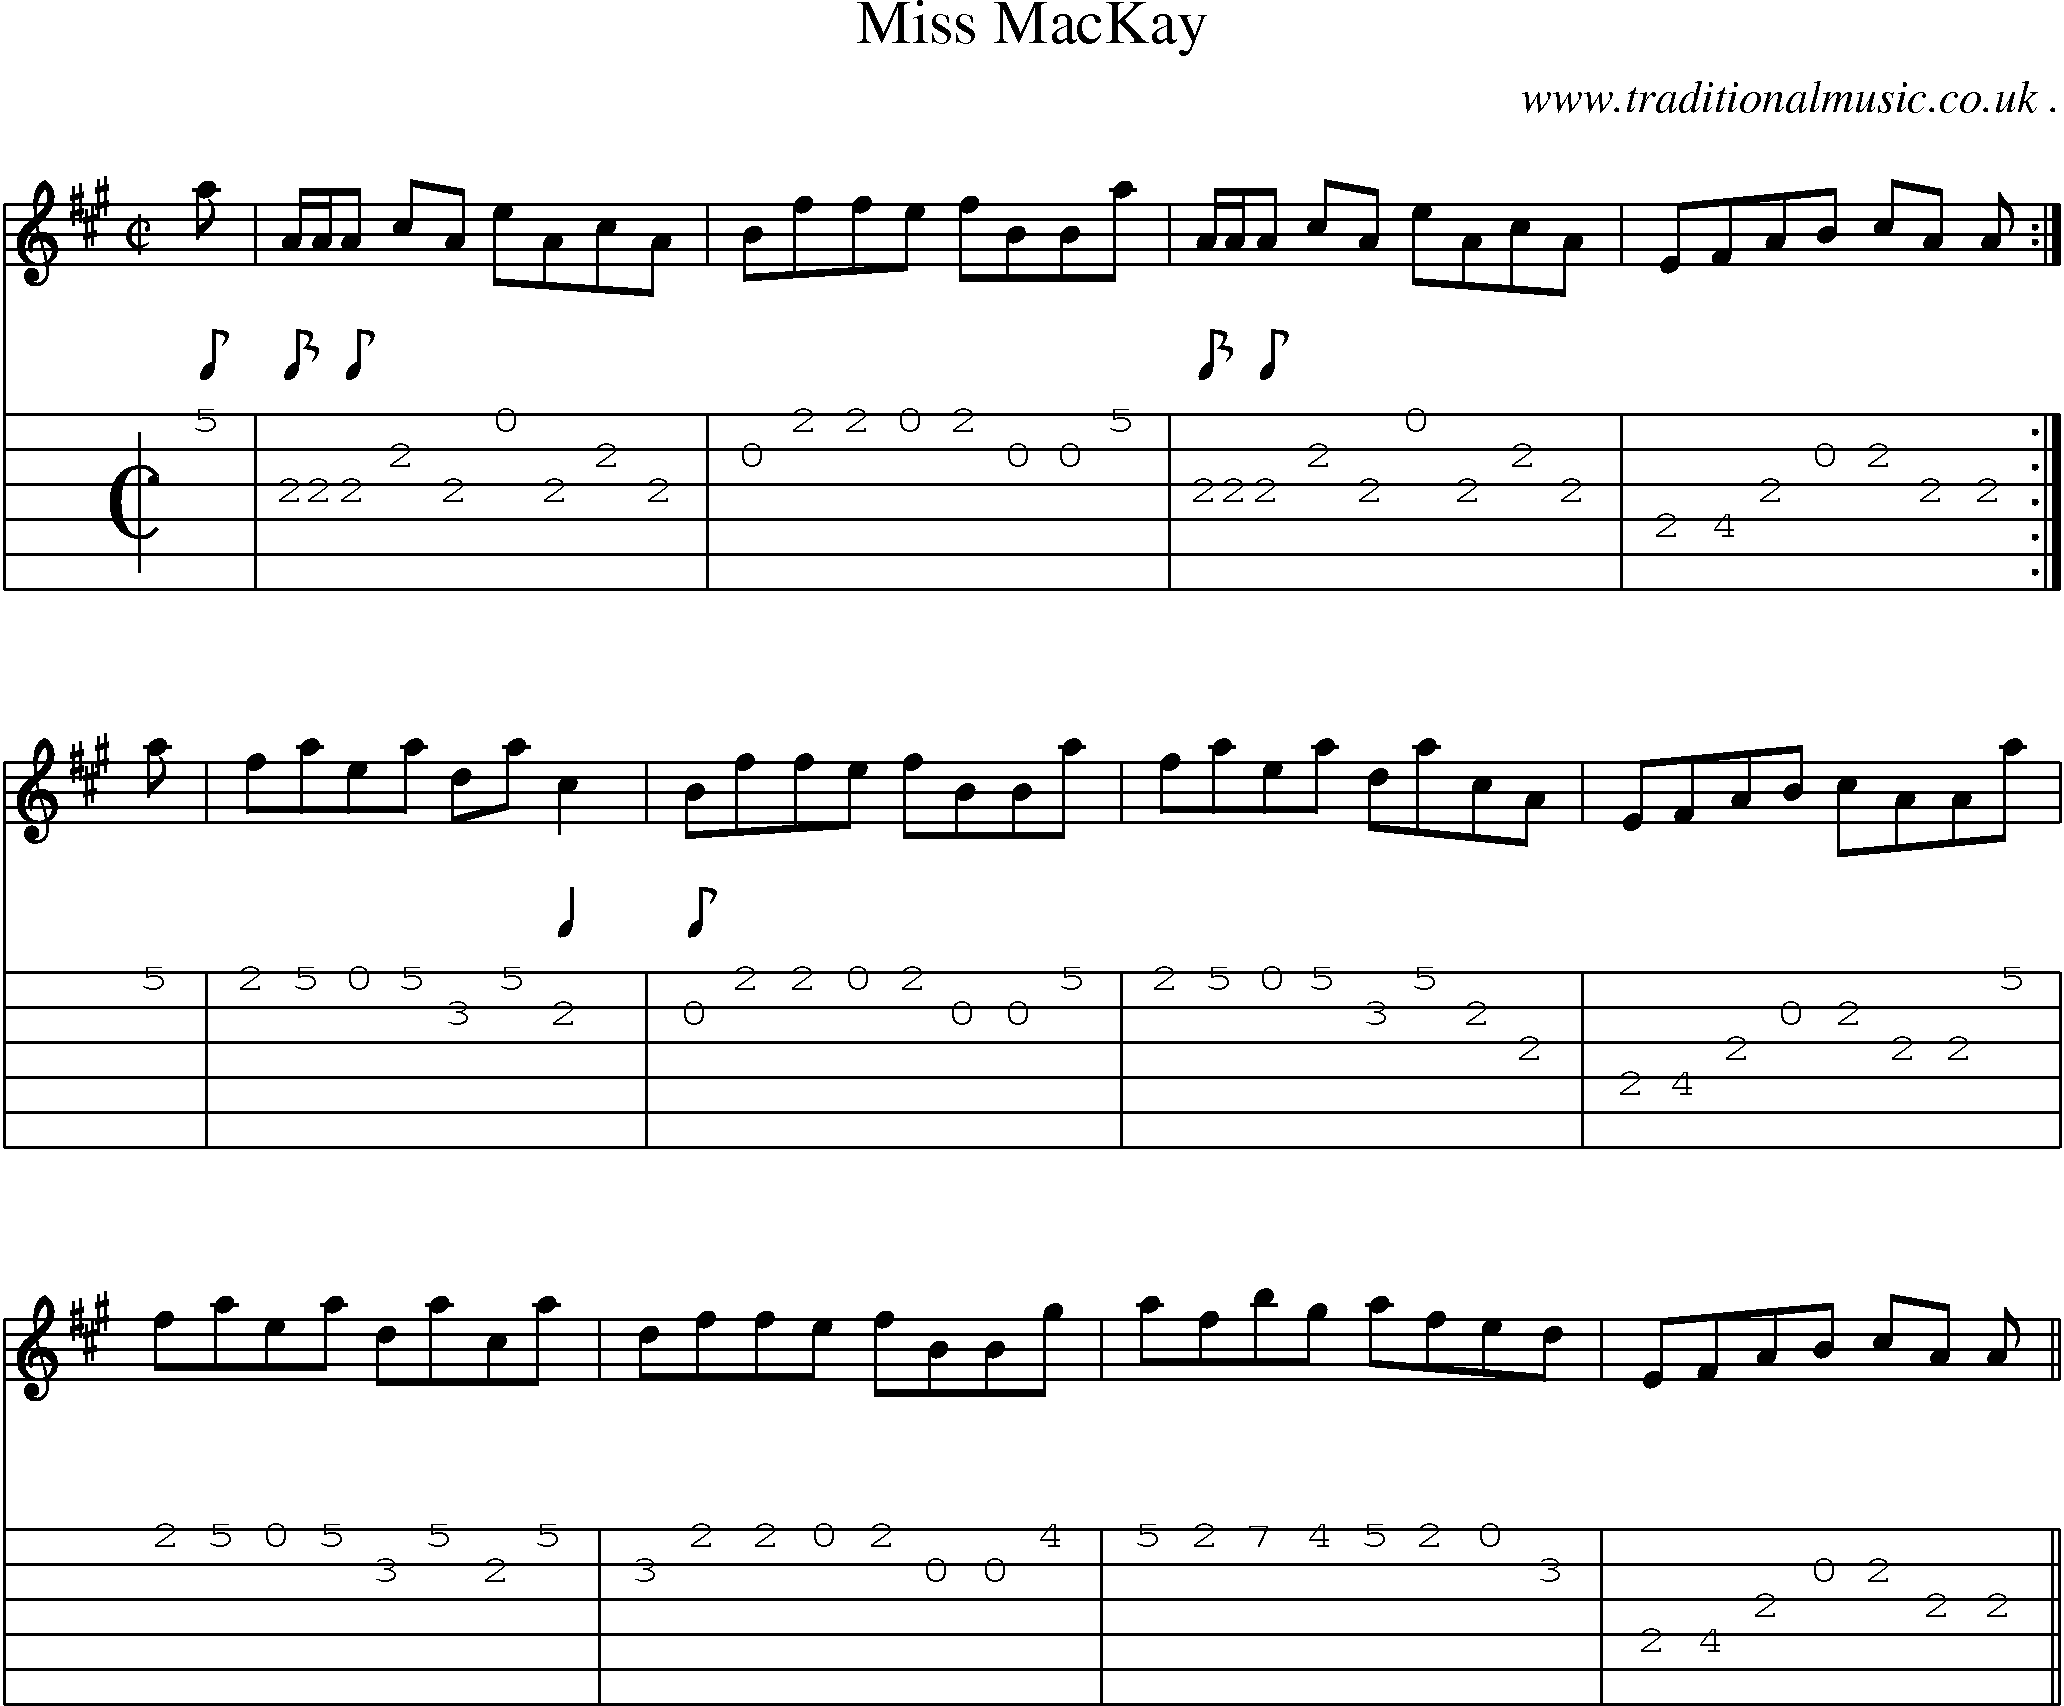 Sheet-music  score, Chords and Guitar Tabs for Miss Mackay